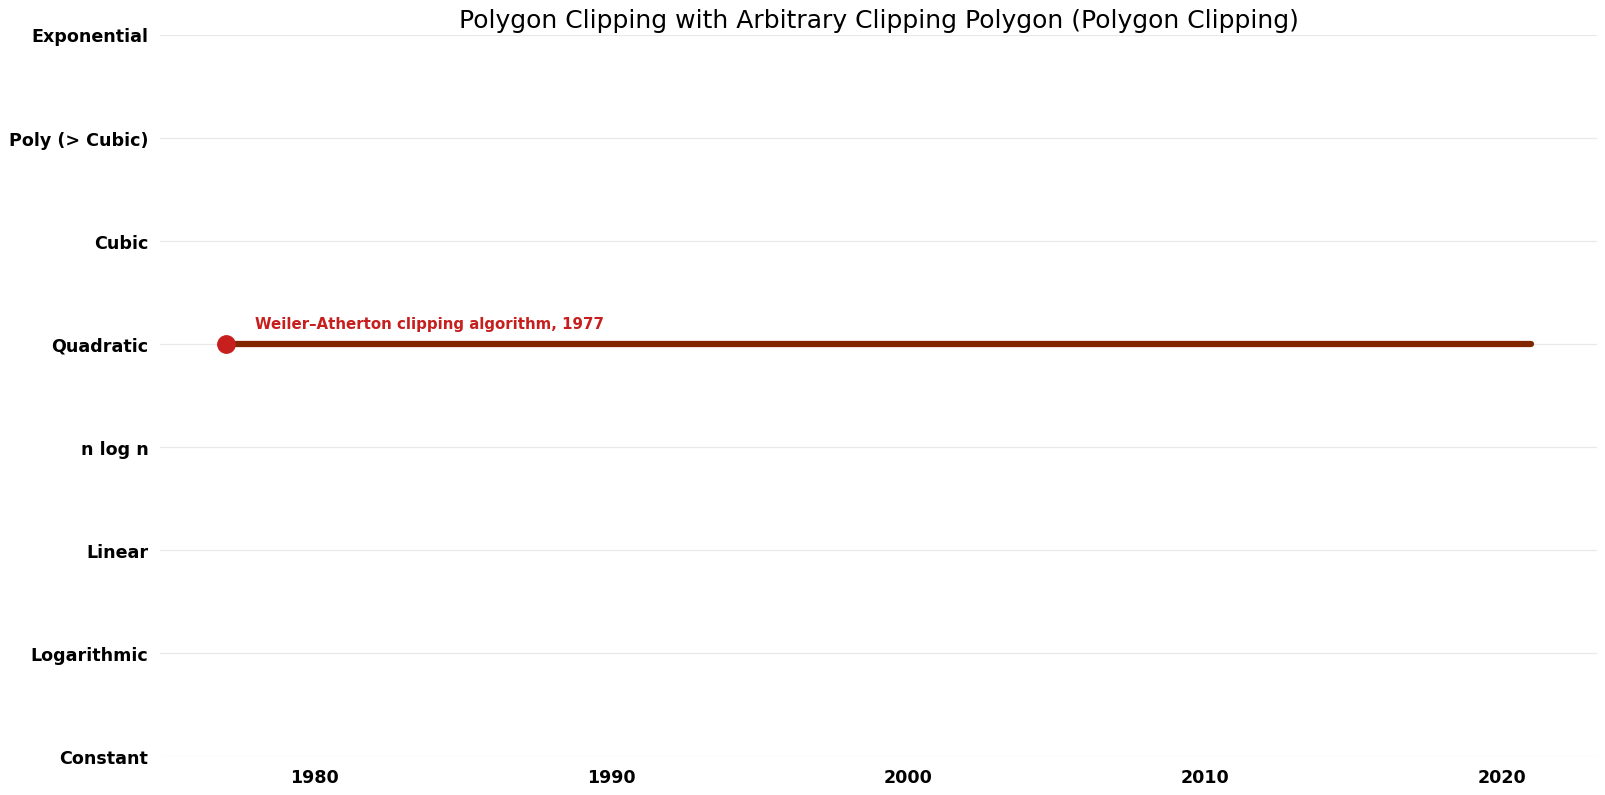 Polygon Clipping - Polygon Clipping with Arbitrary Clipping Polygon - Time.png